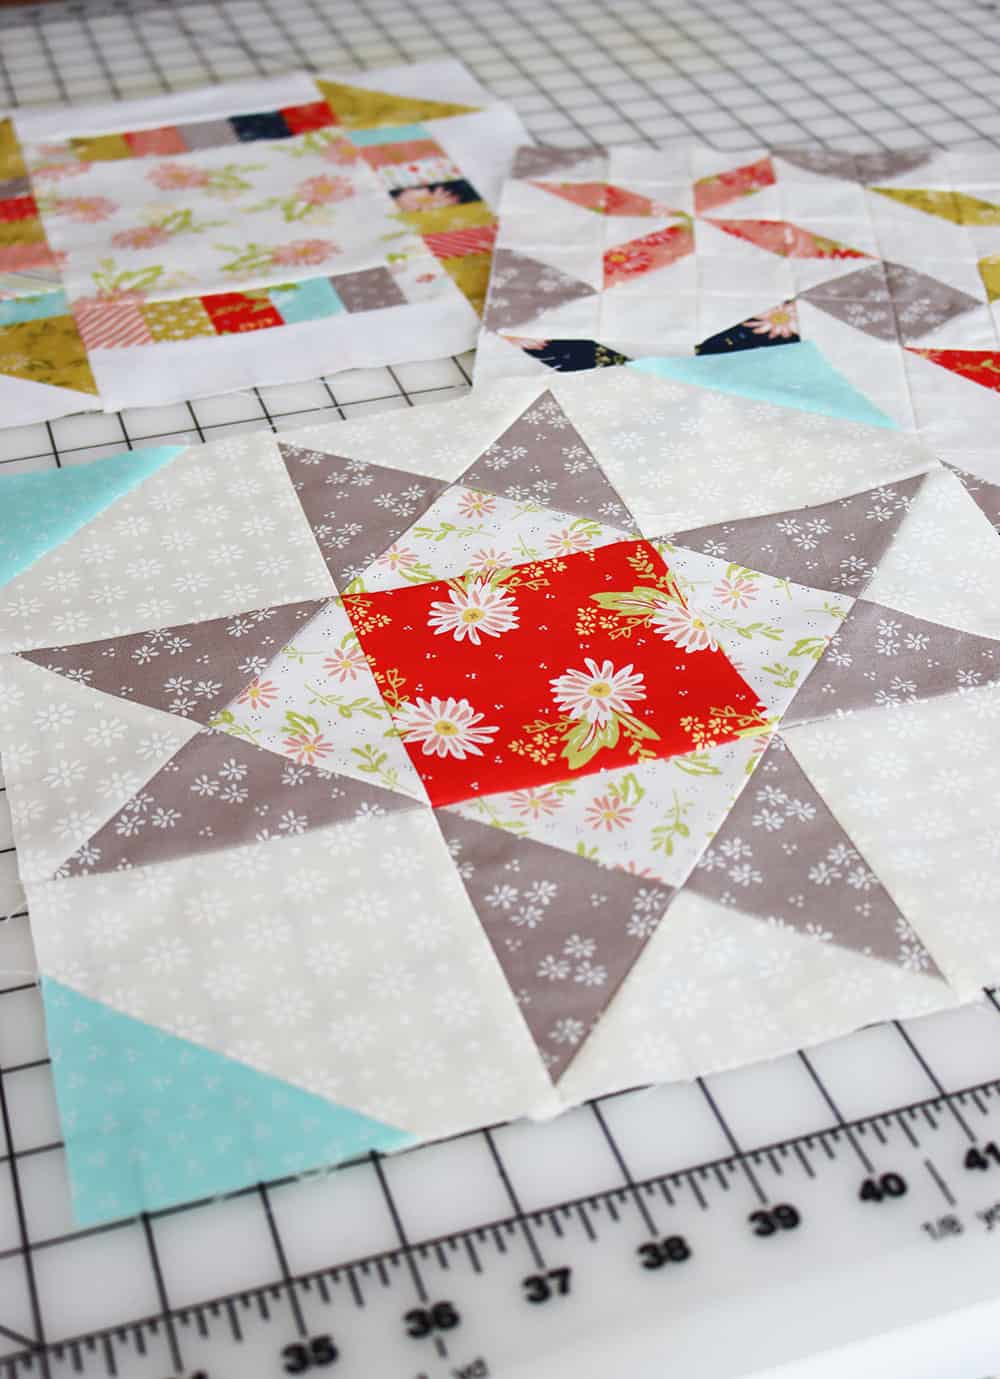 March 2021 Quilt Block of the Month featured by Top US Quilting Blog, A Quilting Life